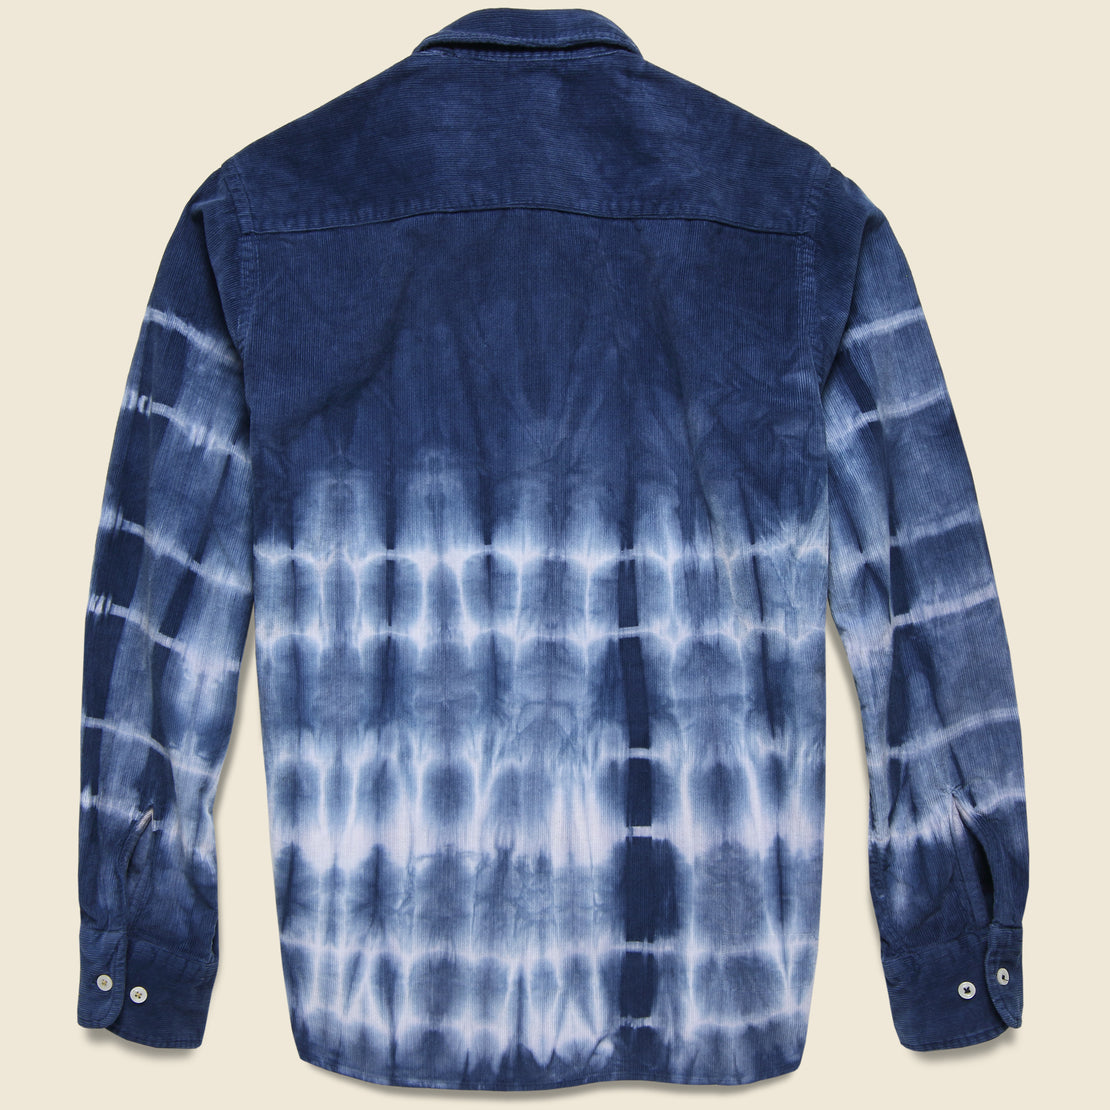 Cord Everyday Shirt - Indigo Tie Dye - Universal Works - STAG Provisions - Tops - L/S Woven - Other Pattern